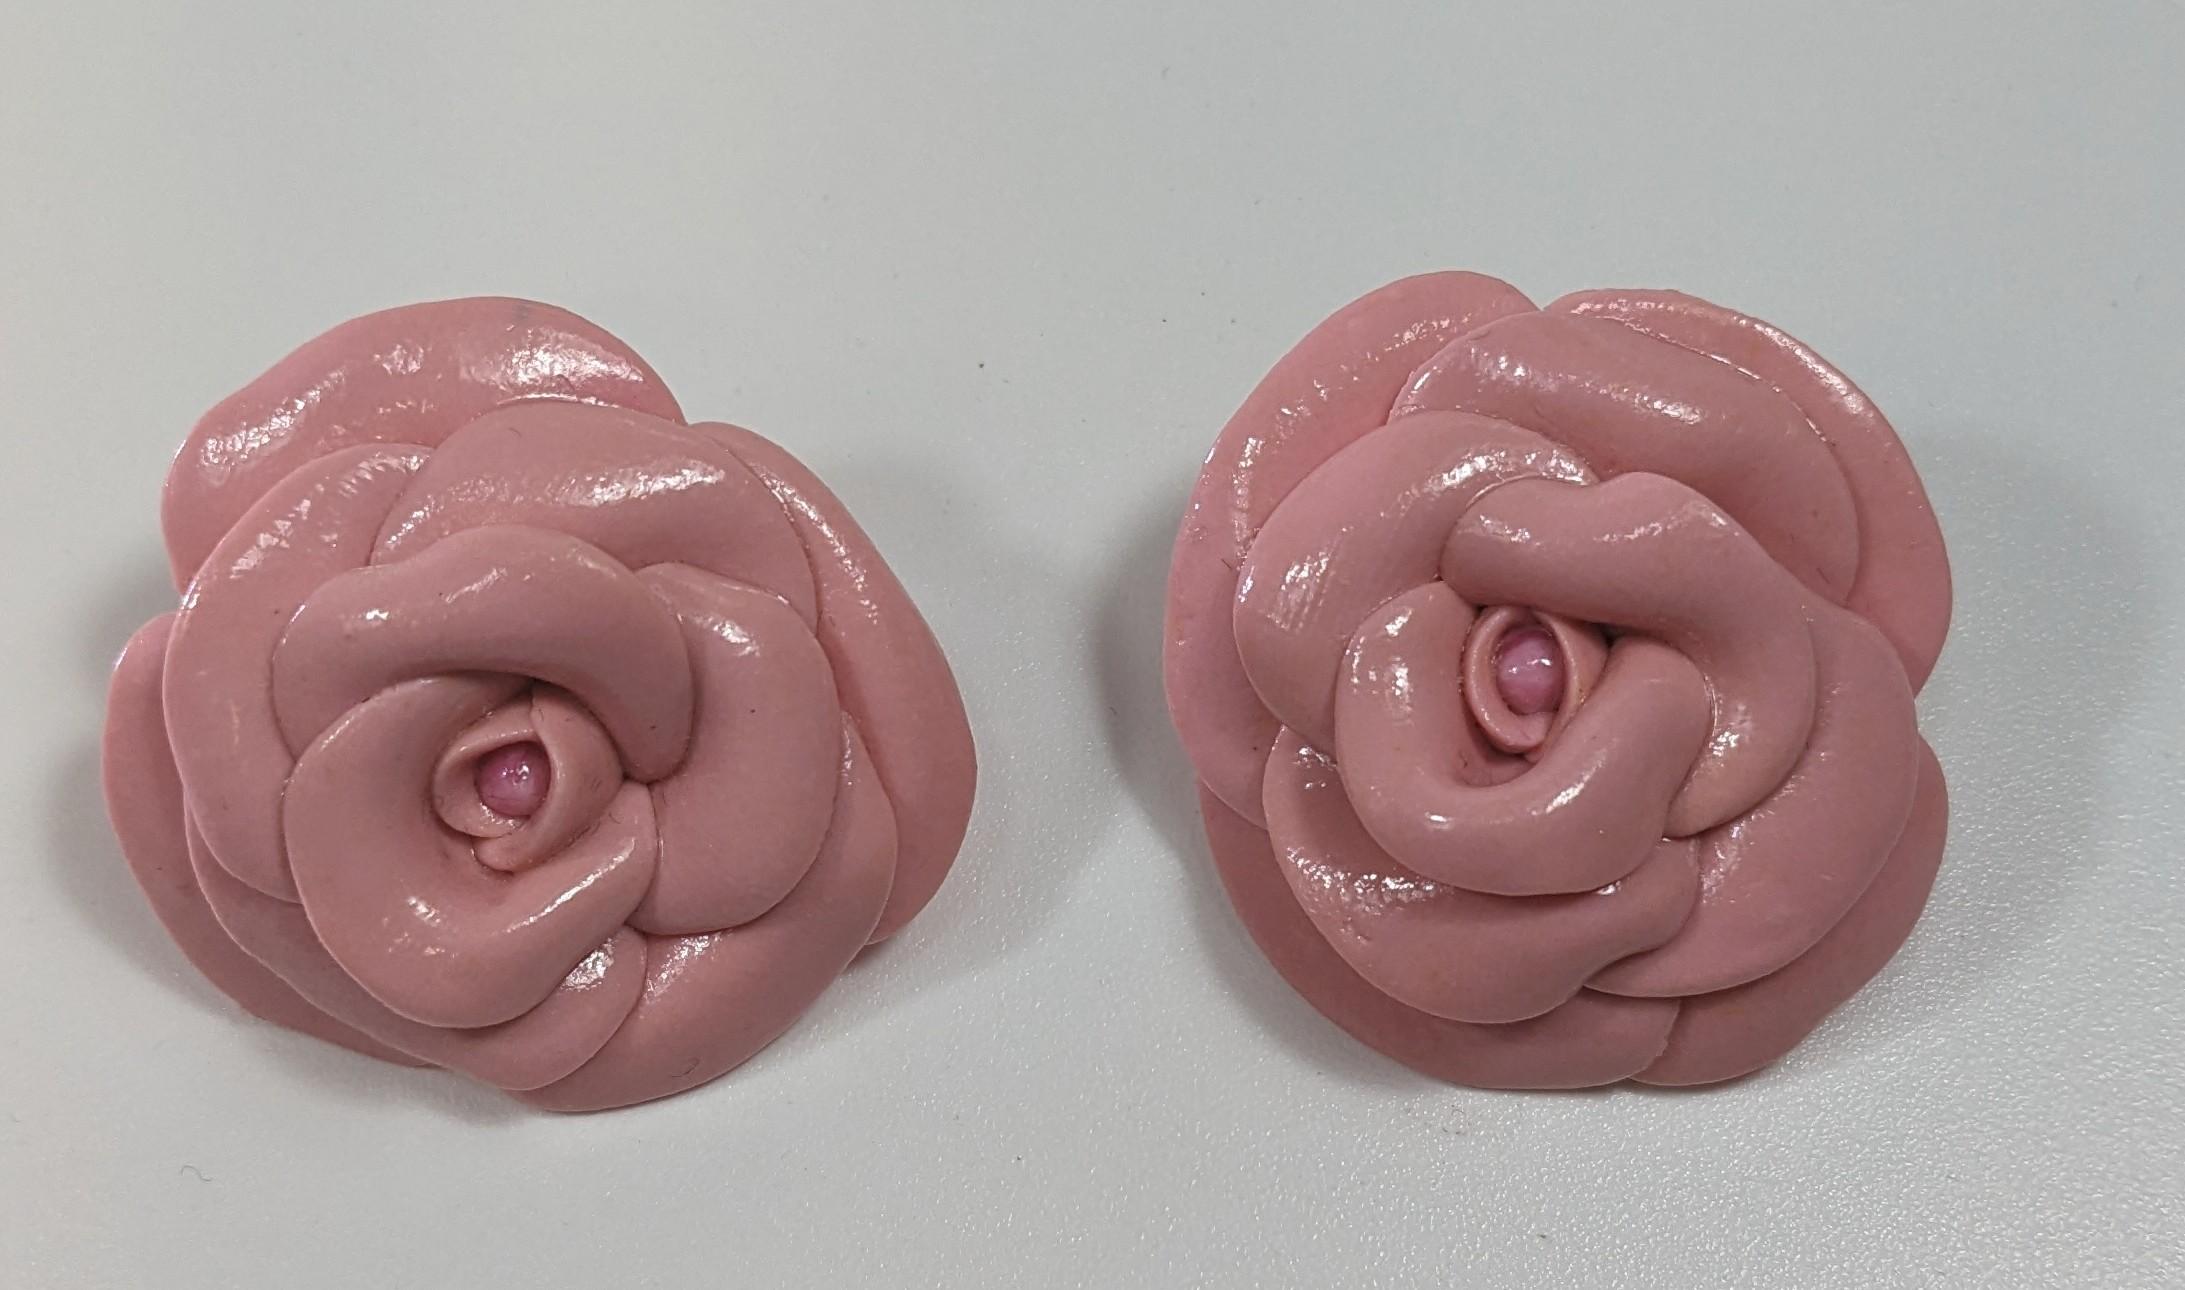  Rose Camelia Polymer Clay  Earrings with golplated silver closure

Diameter: 3,5 cm
Weight: 12 grams
Color  Light rose
Handmade




Pradera Fashion Division  is specialized in European Fashion designers, clothing, handbags, accessories and as such